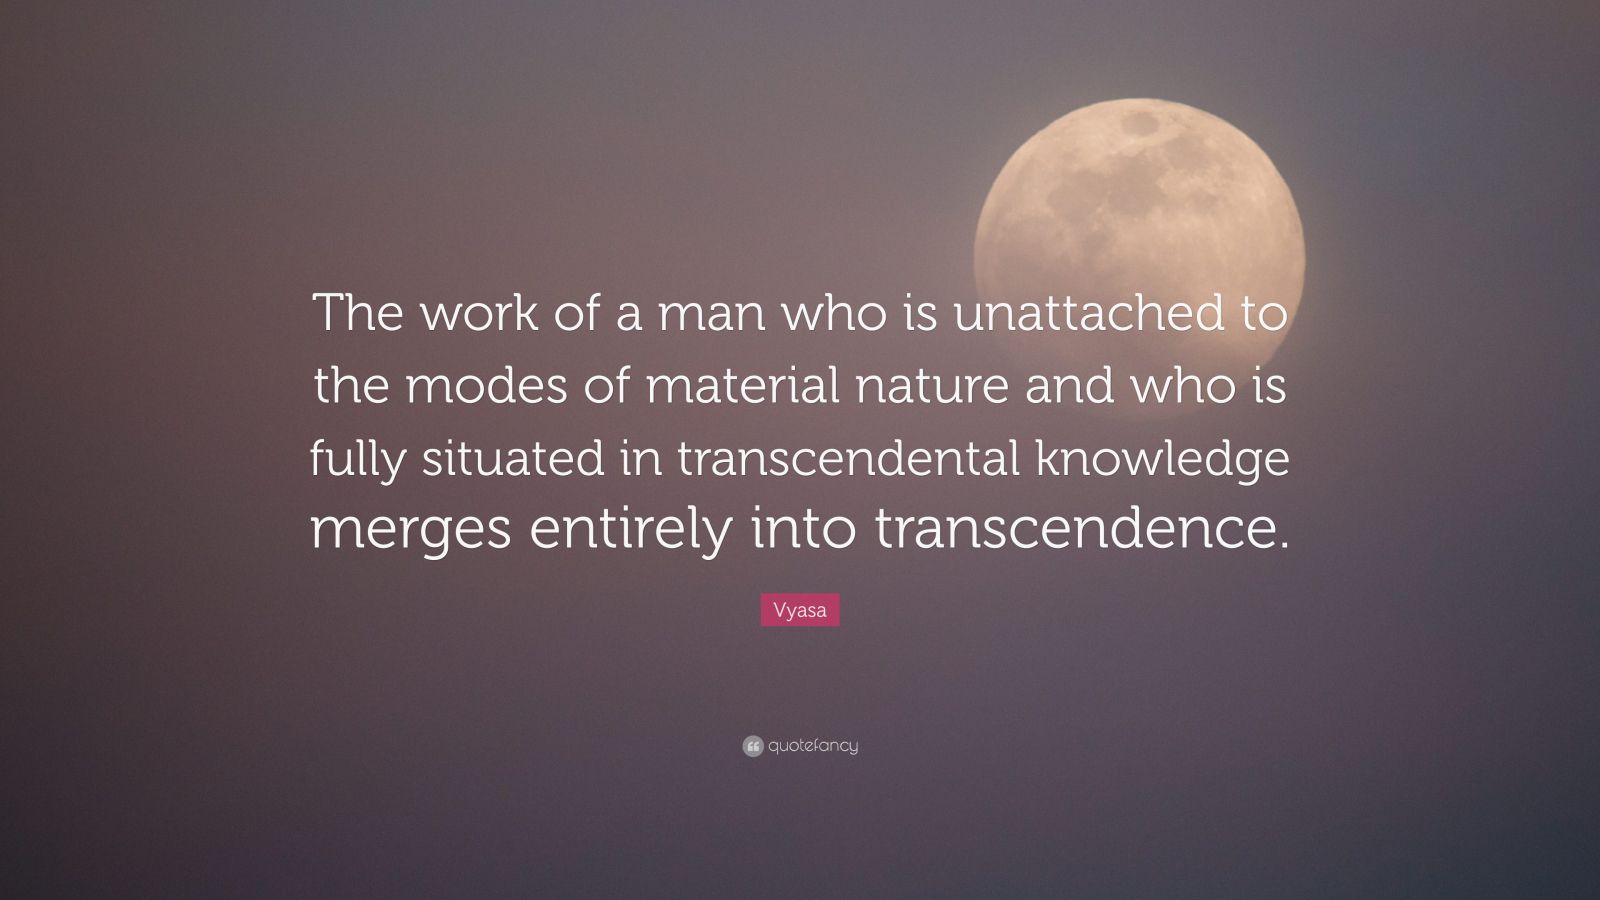 Vyasa Quote: “The work of a man who is unattached to the modes of ...